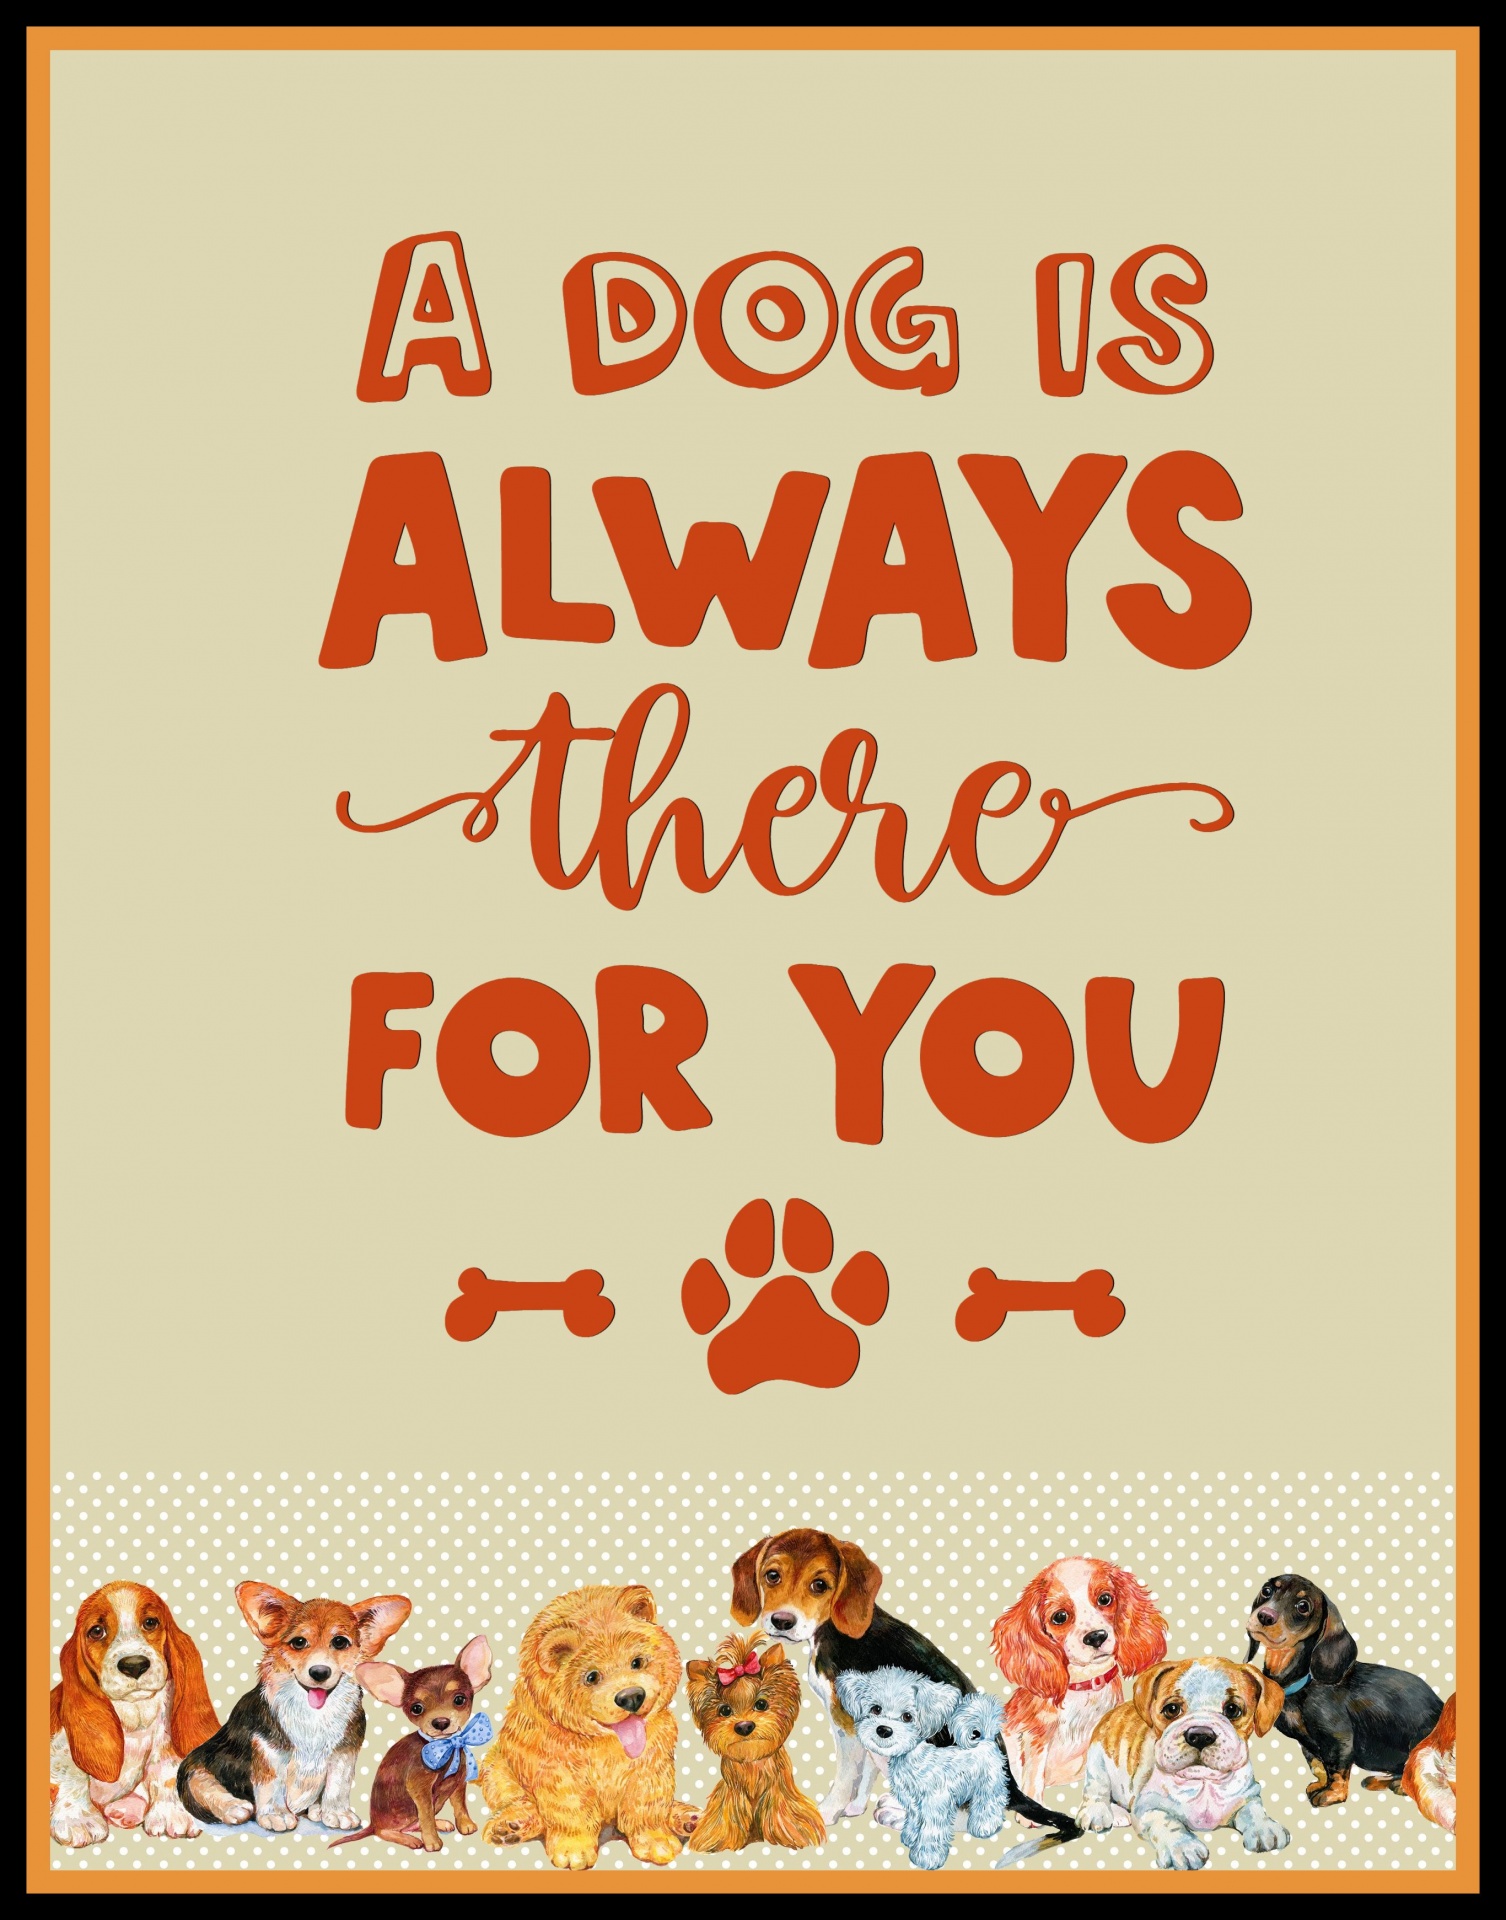 poster featuring an illustration of a dog with wordsa dog is always there for you